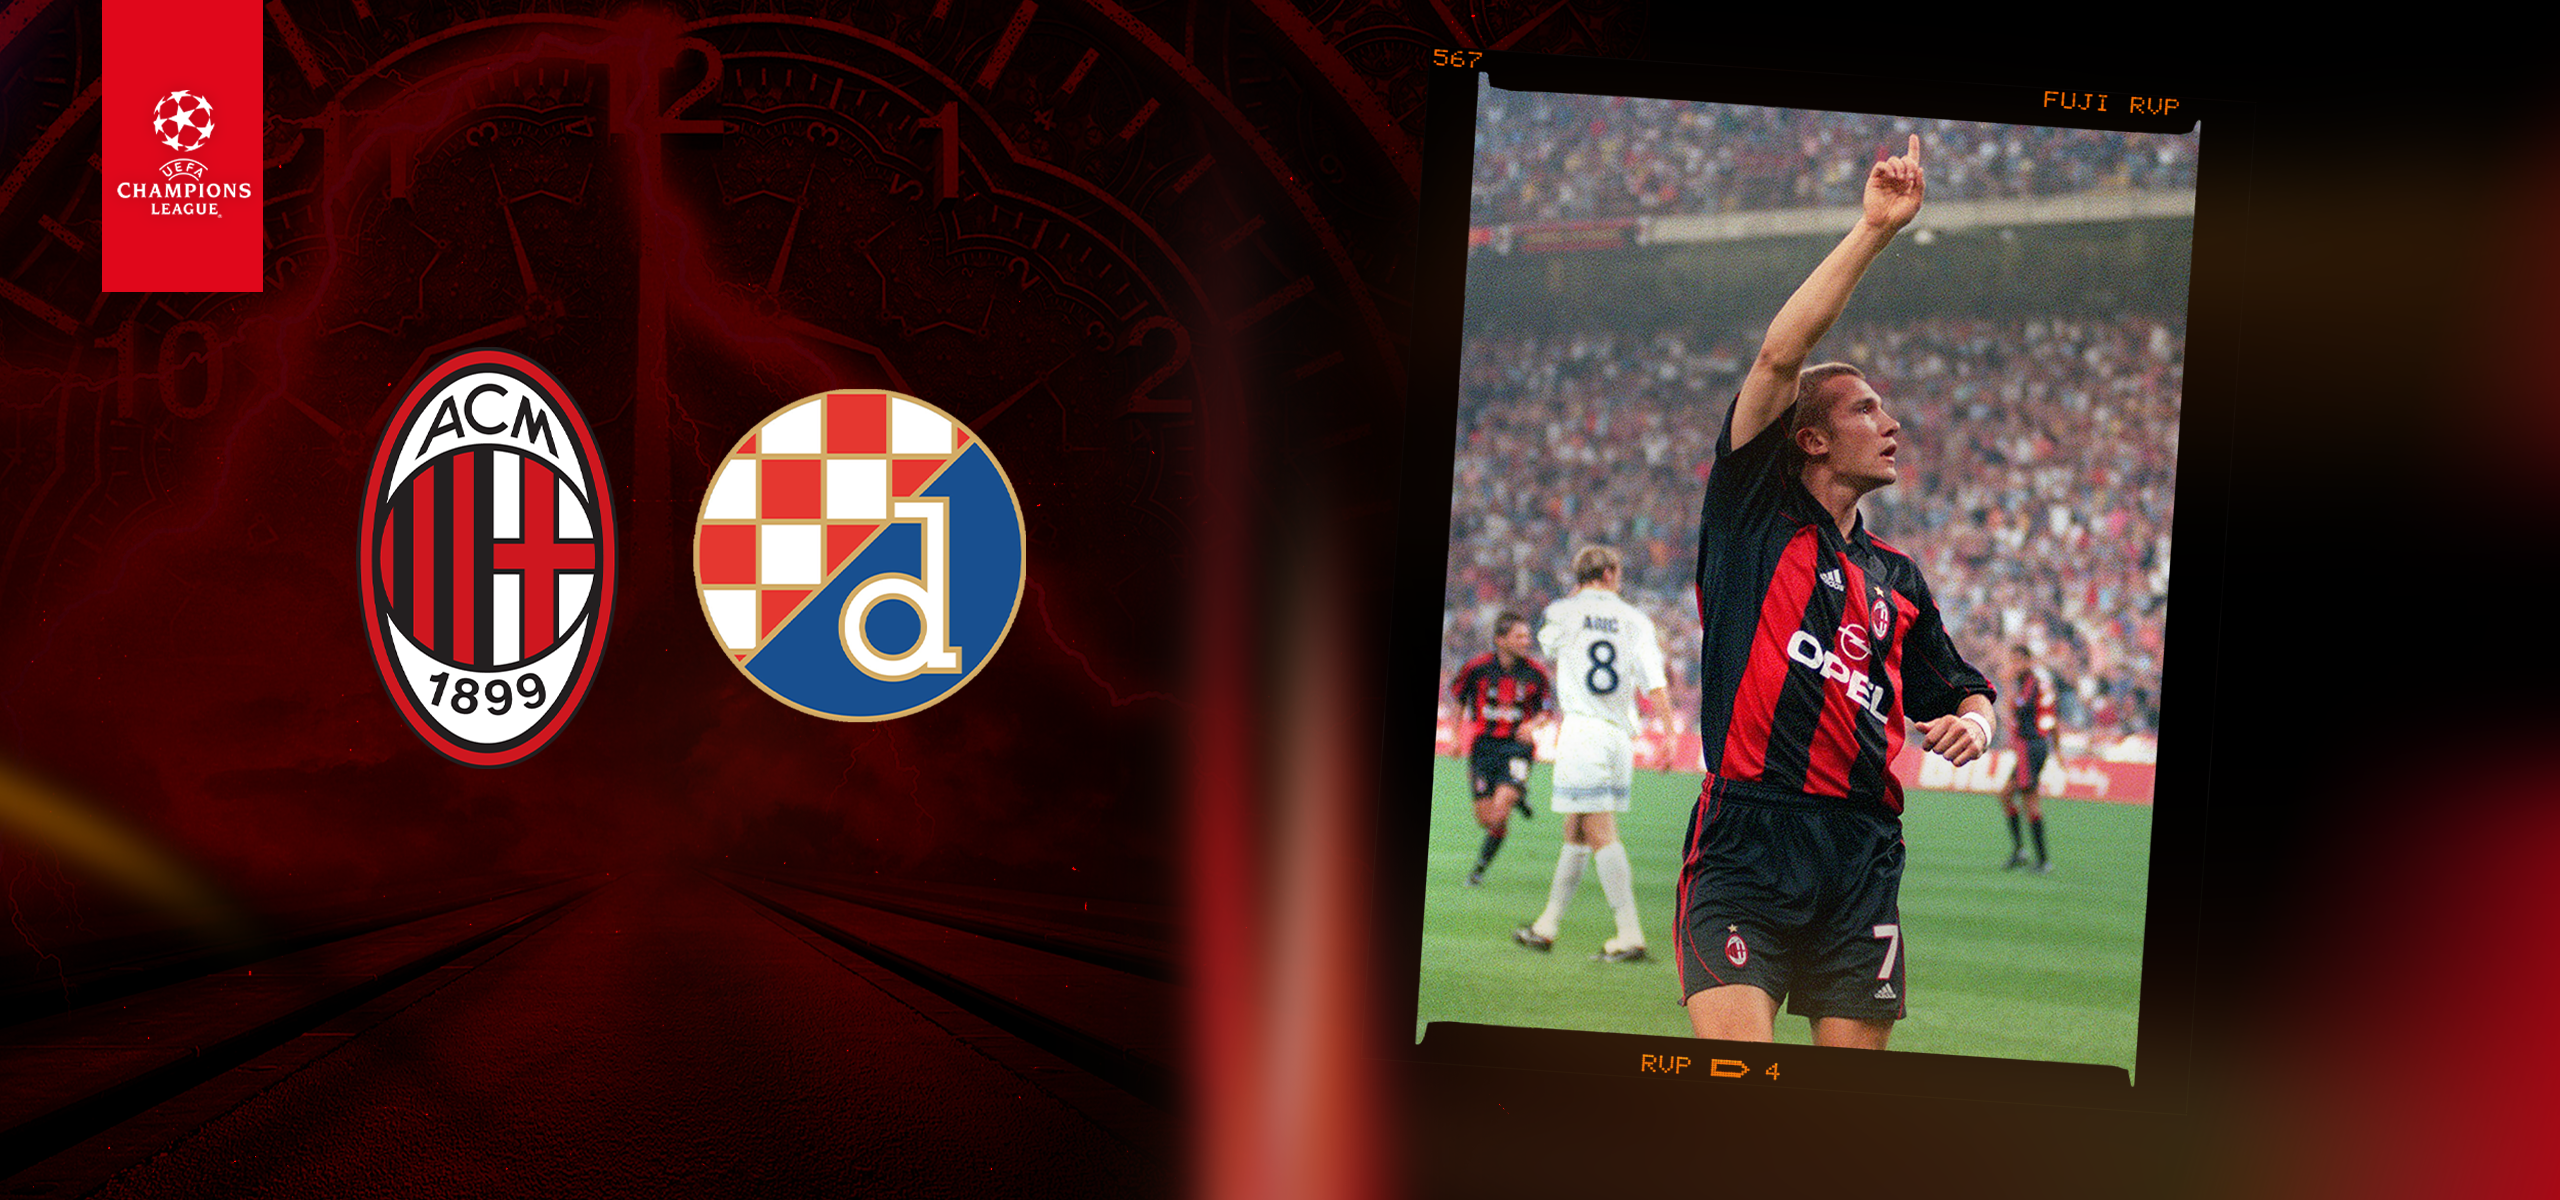 Champions League preview: AC Milan vs. Dinamo Zagreb - Team news,  opposition insight, stats and more